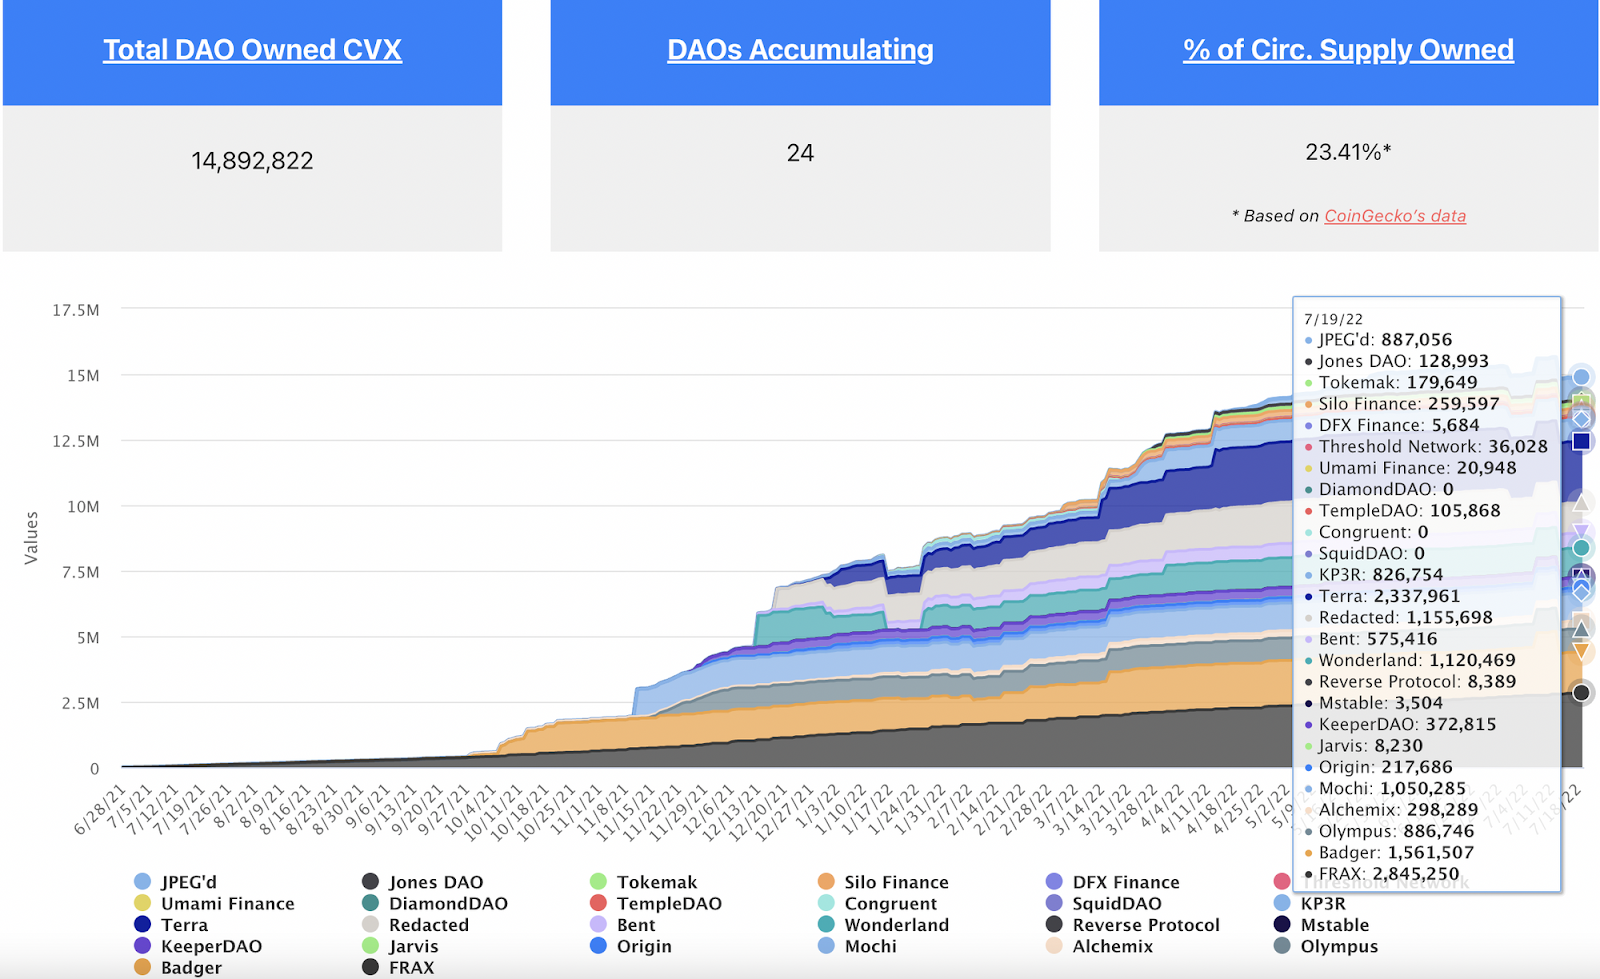 CVX Owned by DAOs, Source: https://daocvx.com/